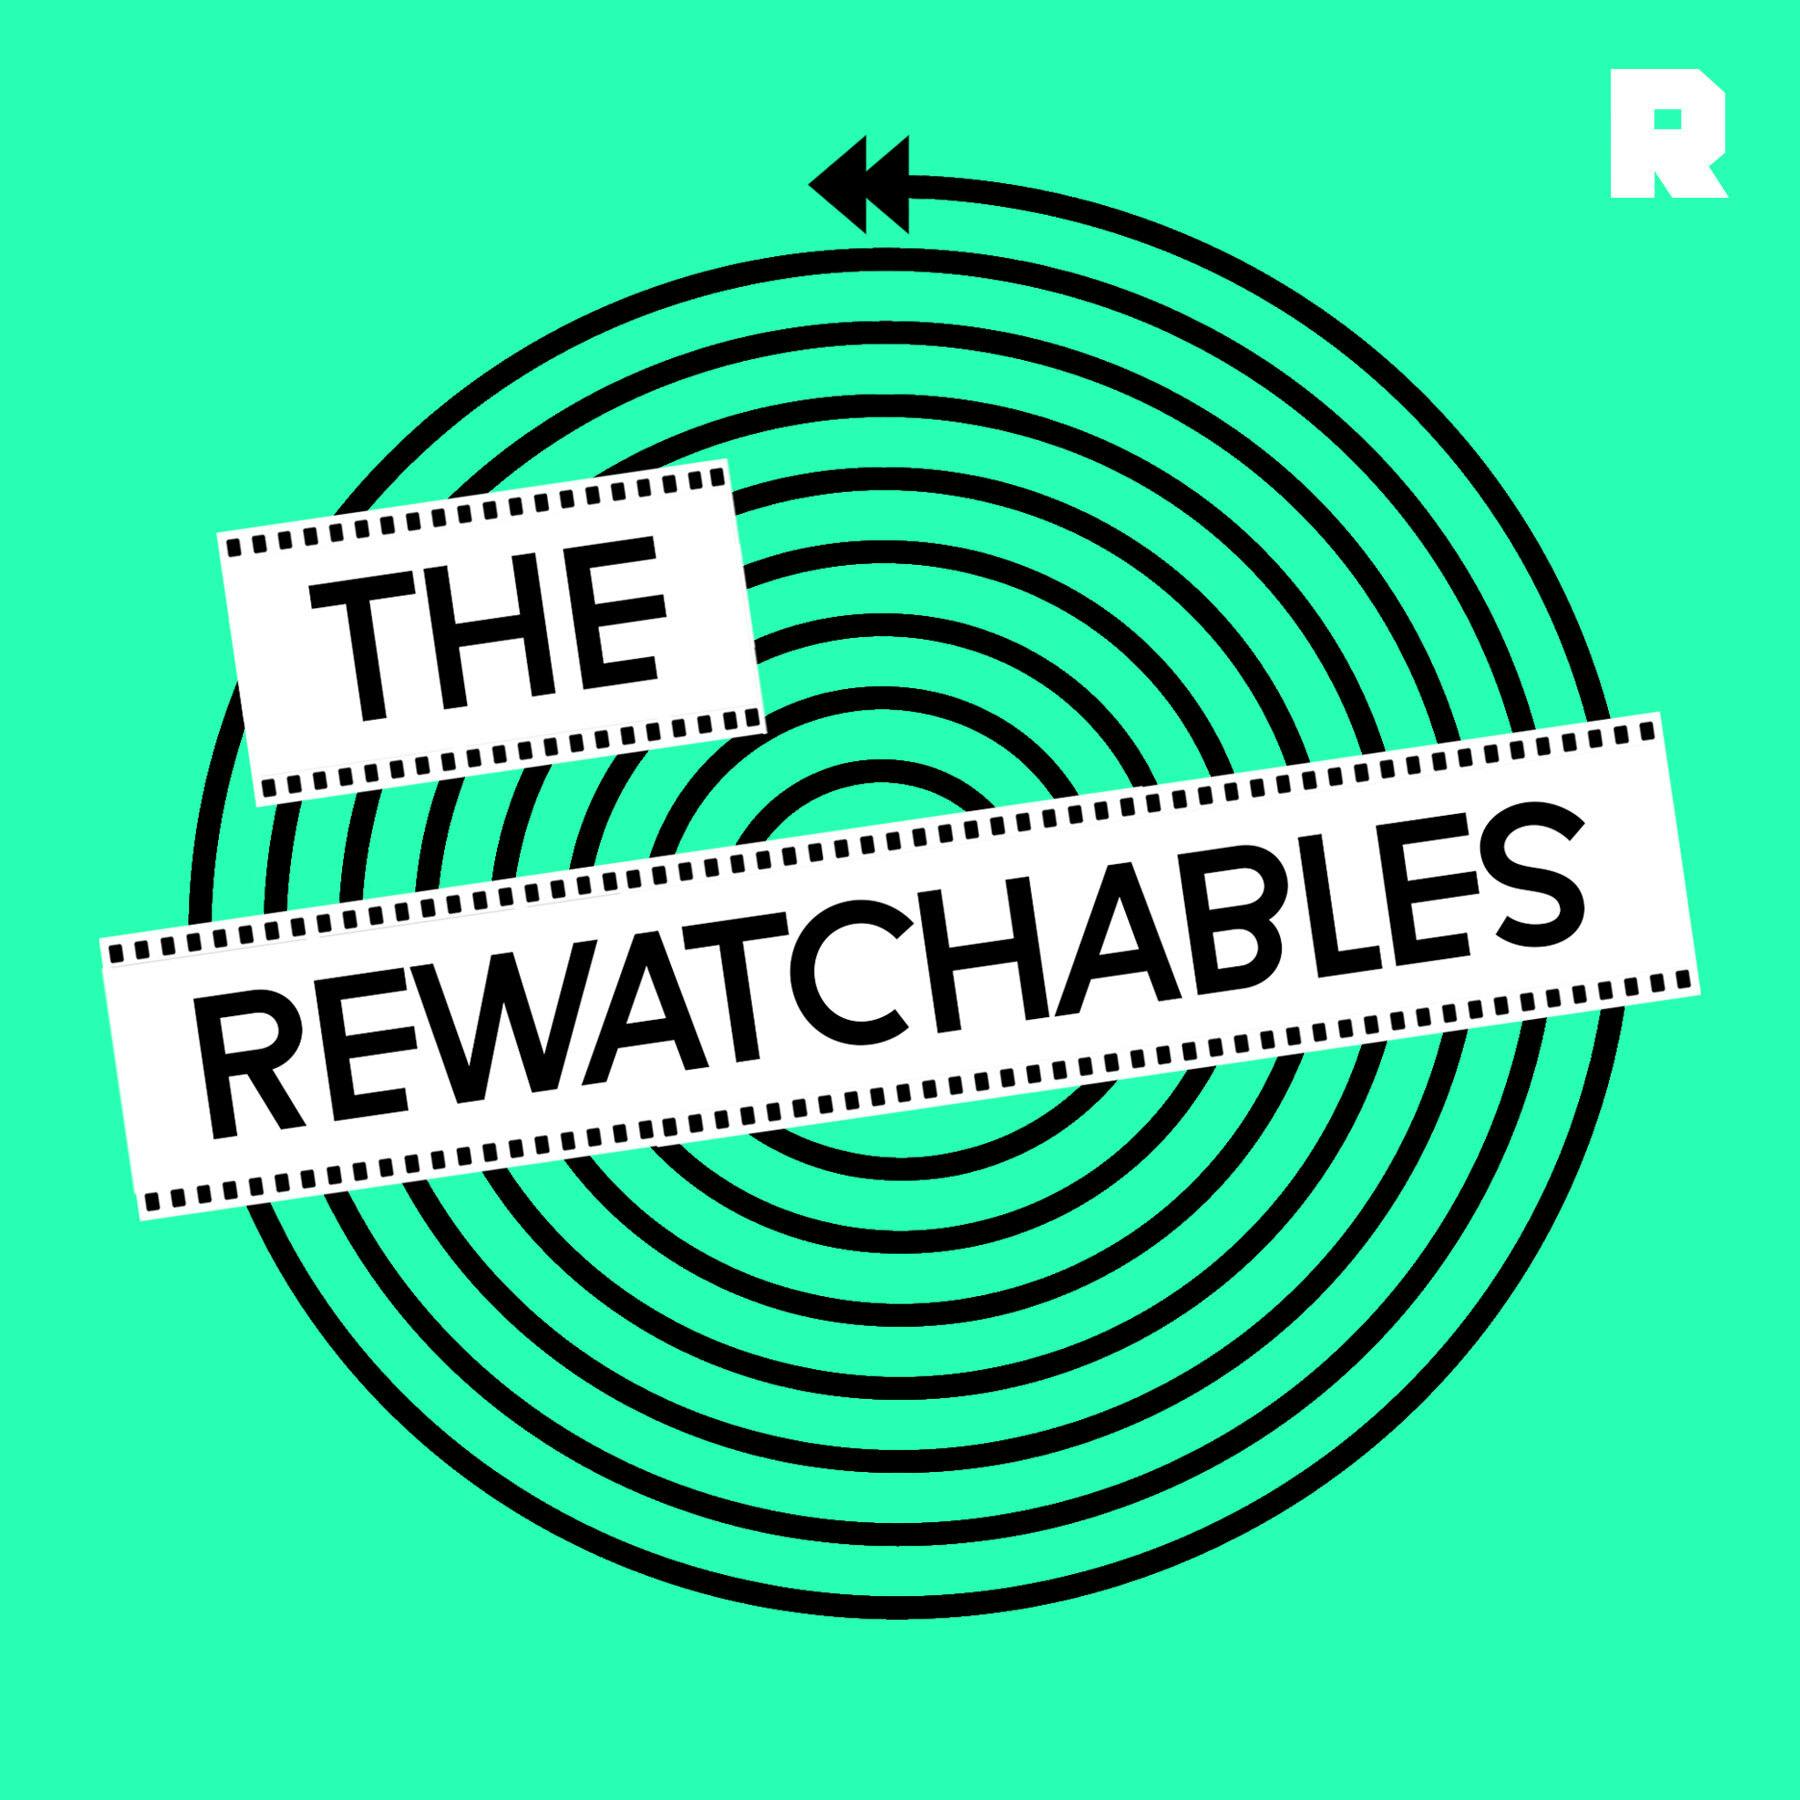 The Rewatchables podcast